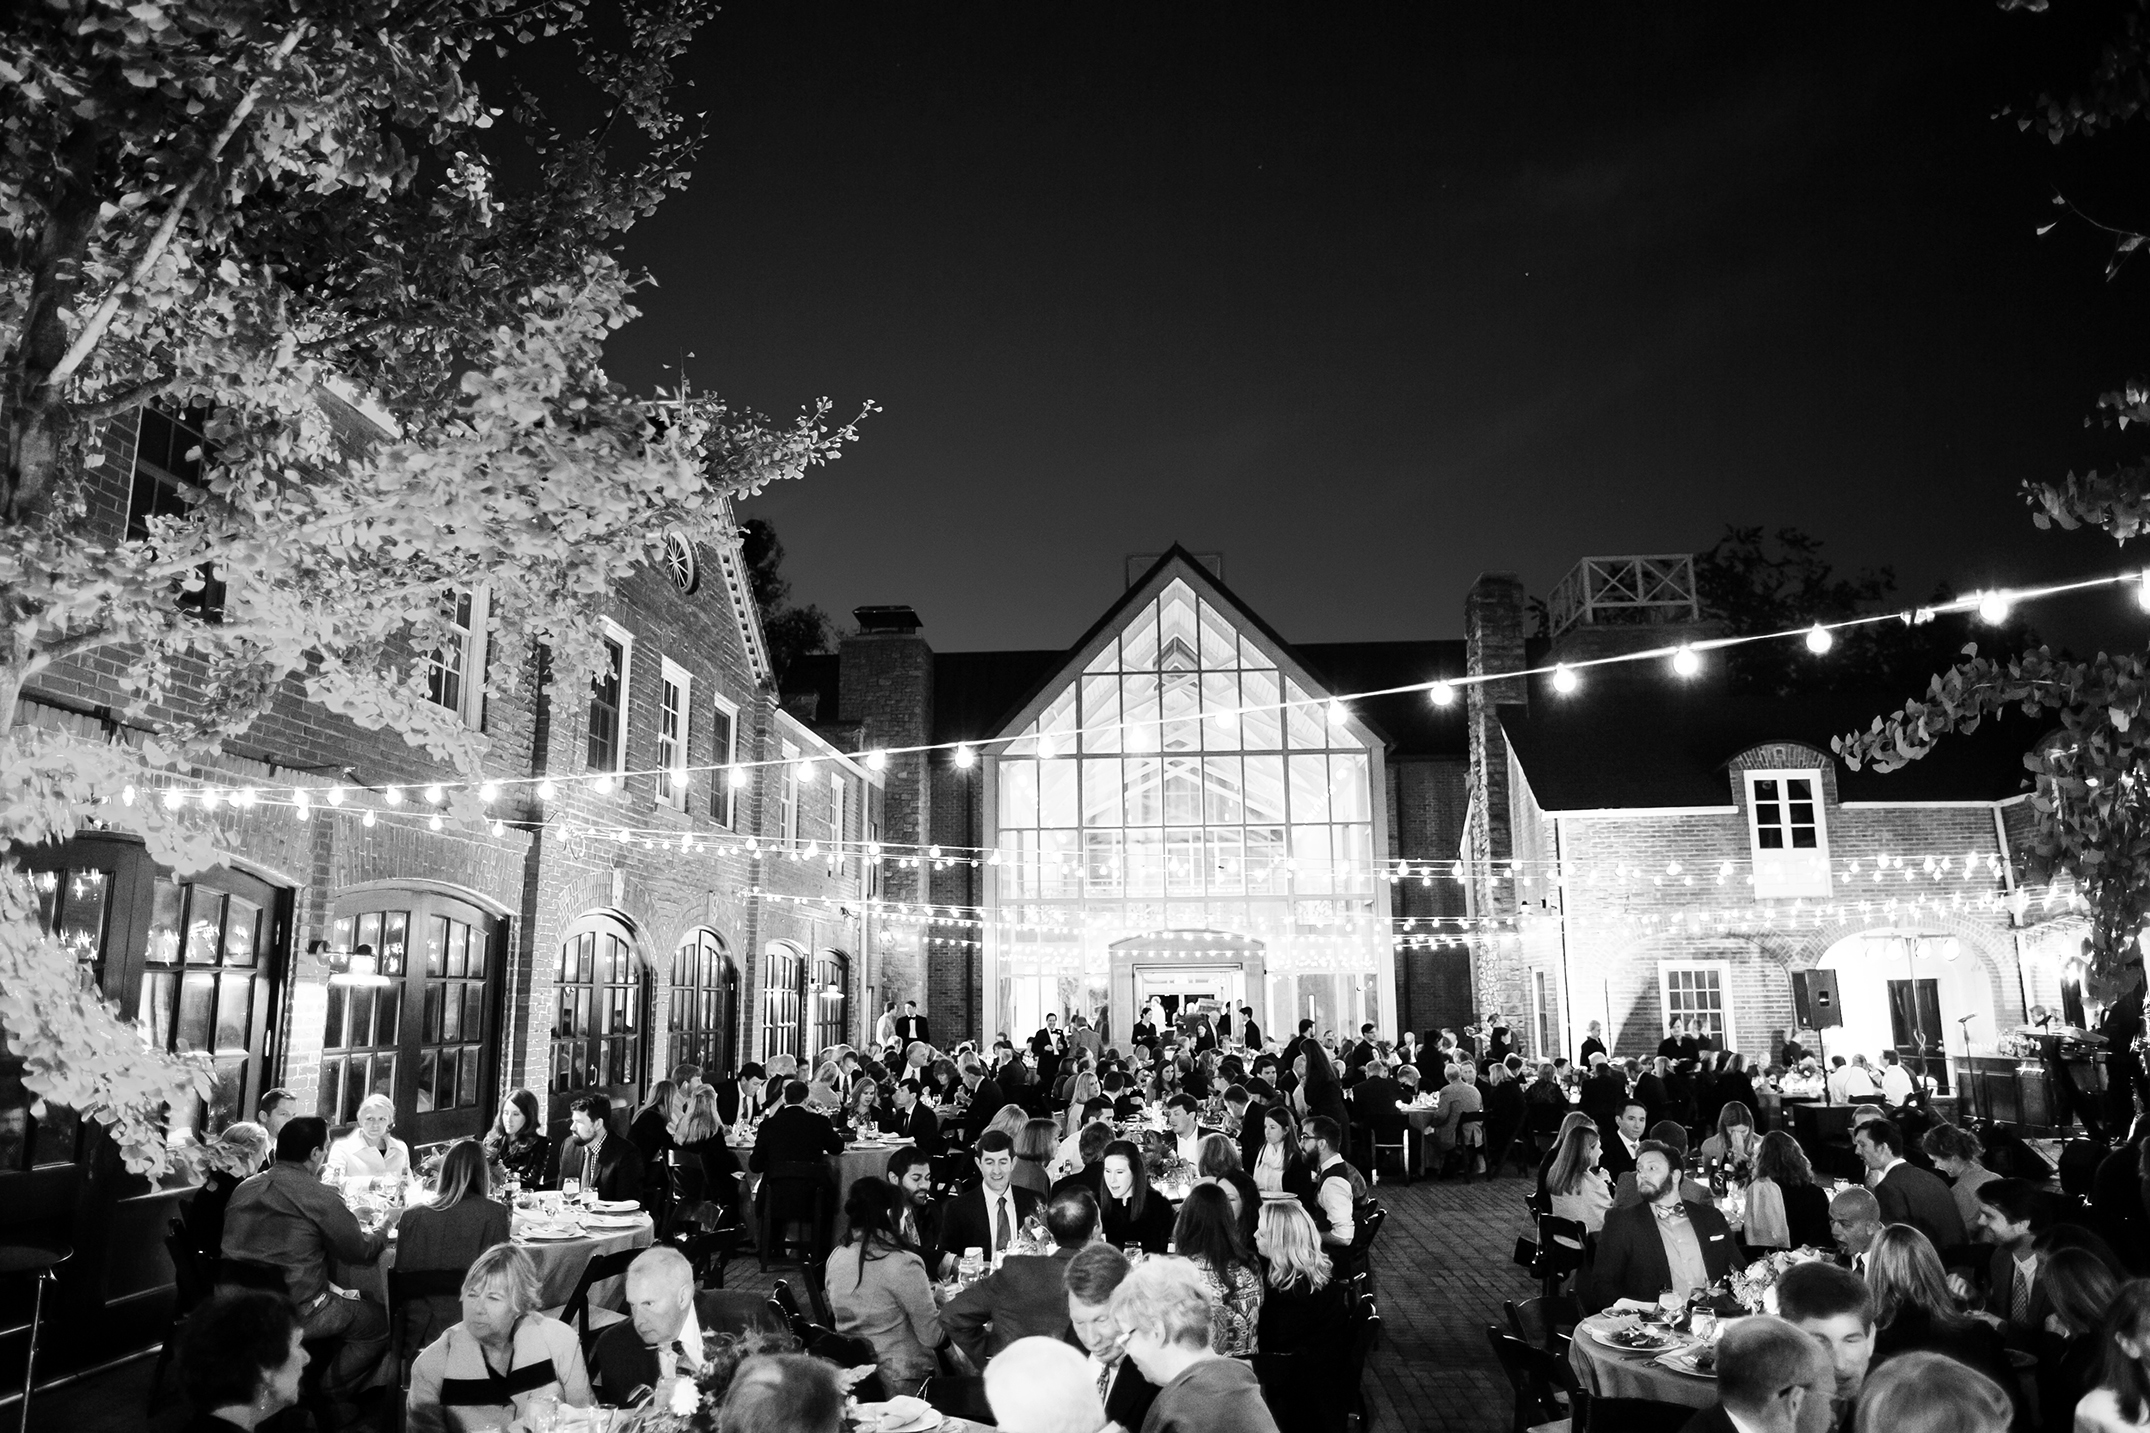 Cheekwood frist learning center at night with string lights and people seated for wedding reception. Image is in black and white.